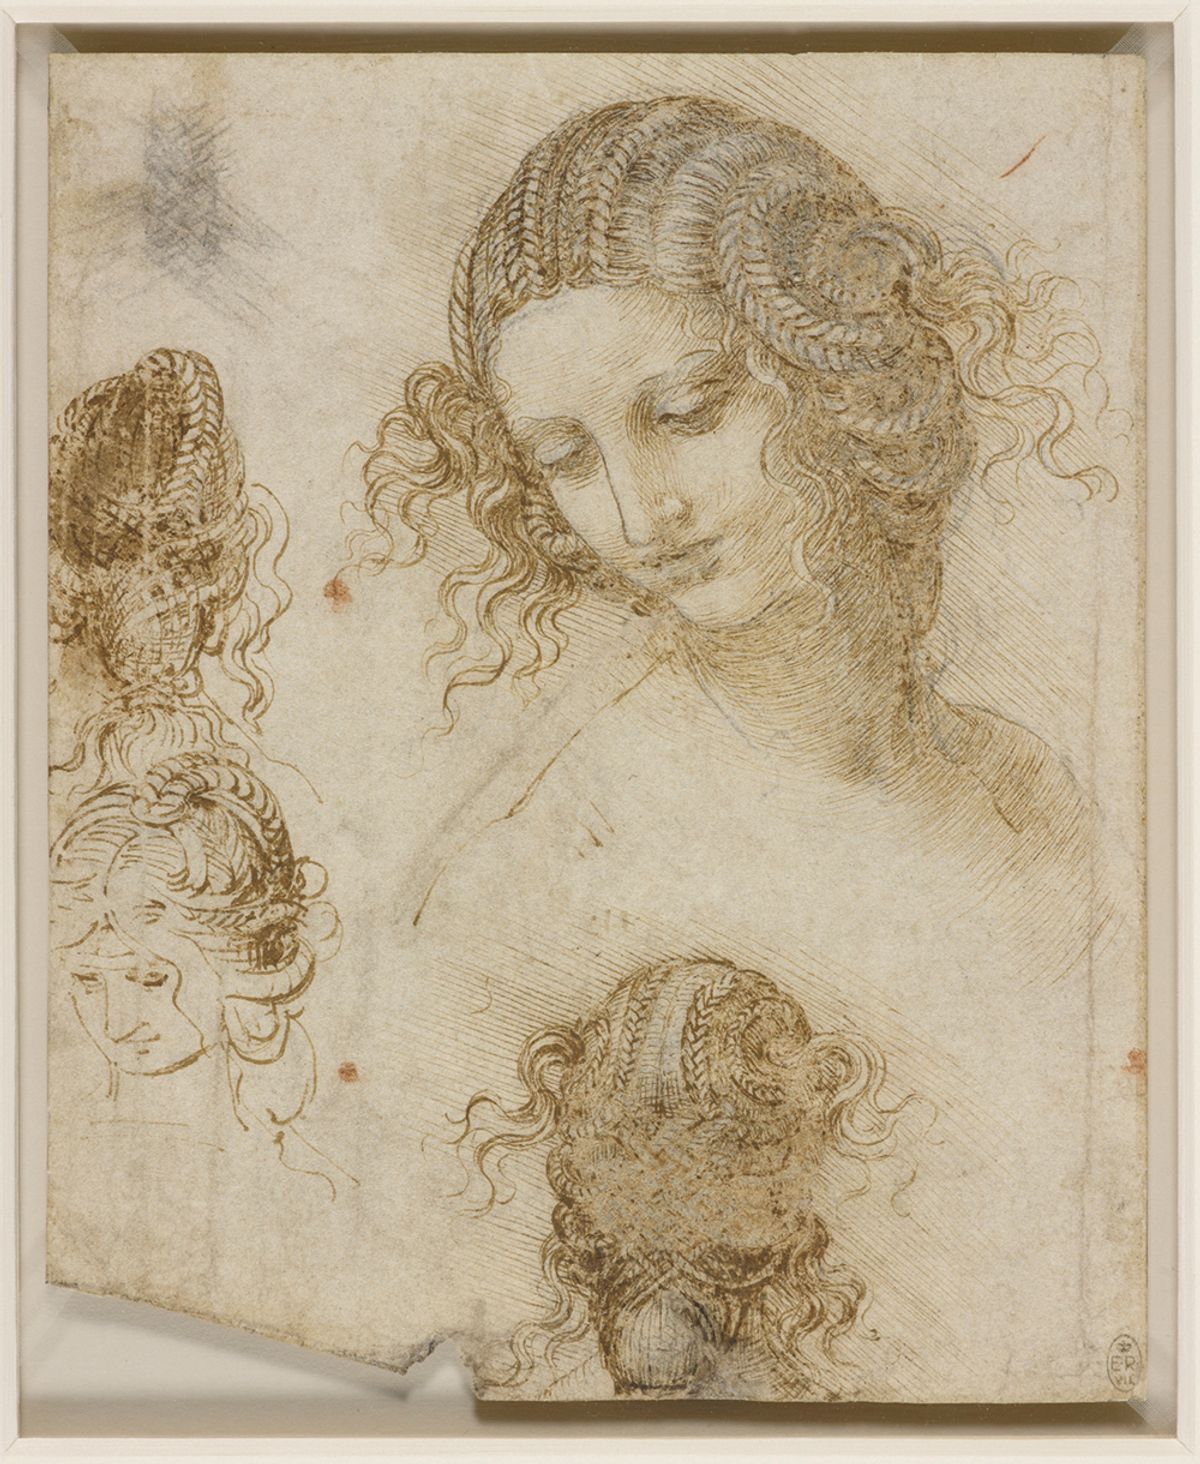 The head of Leda (around 1505-08), a study for Leonardo’s missing Leda and the Swan, is one of 23 works to be lent to the Louvre show by the Royal Collection Royal Collection Trust, © Her Majesty Queen Elizabeth II 2019